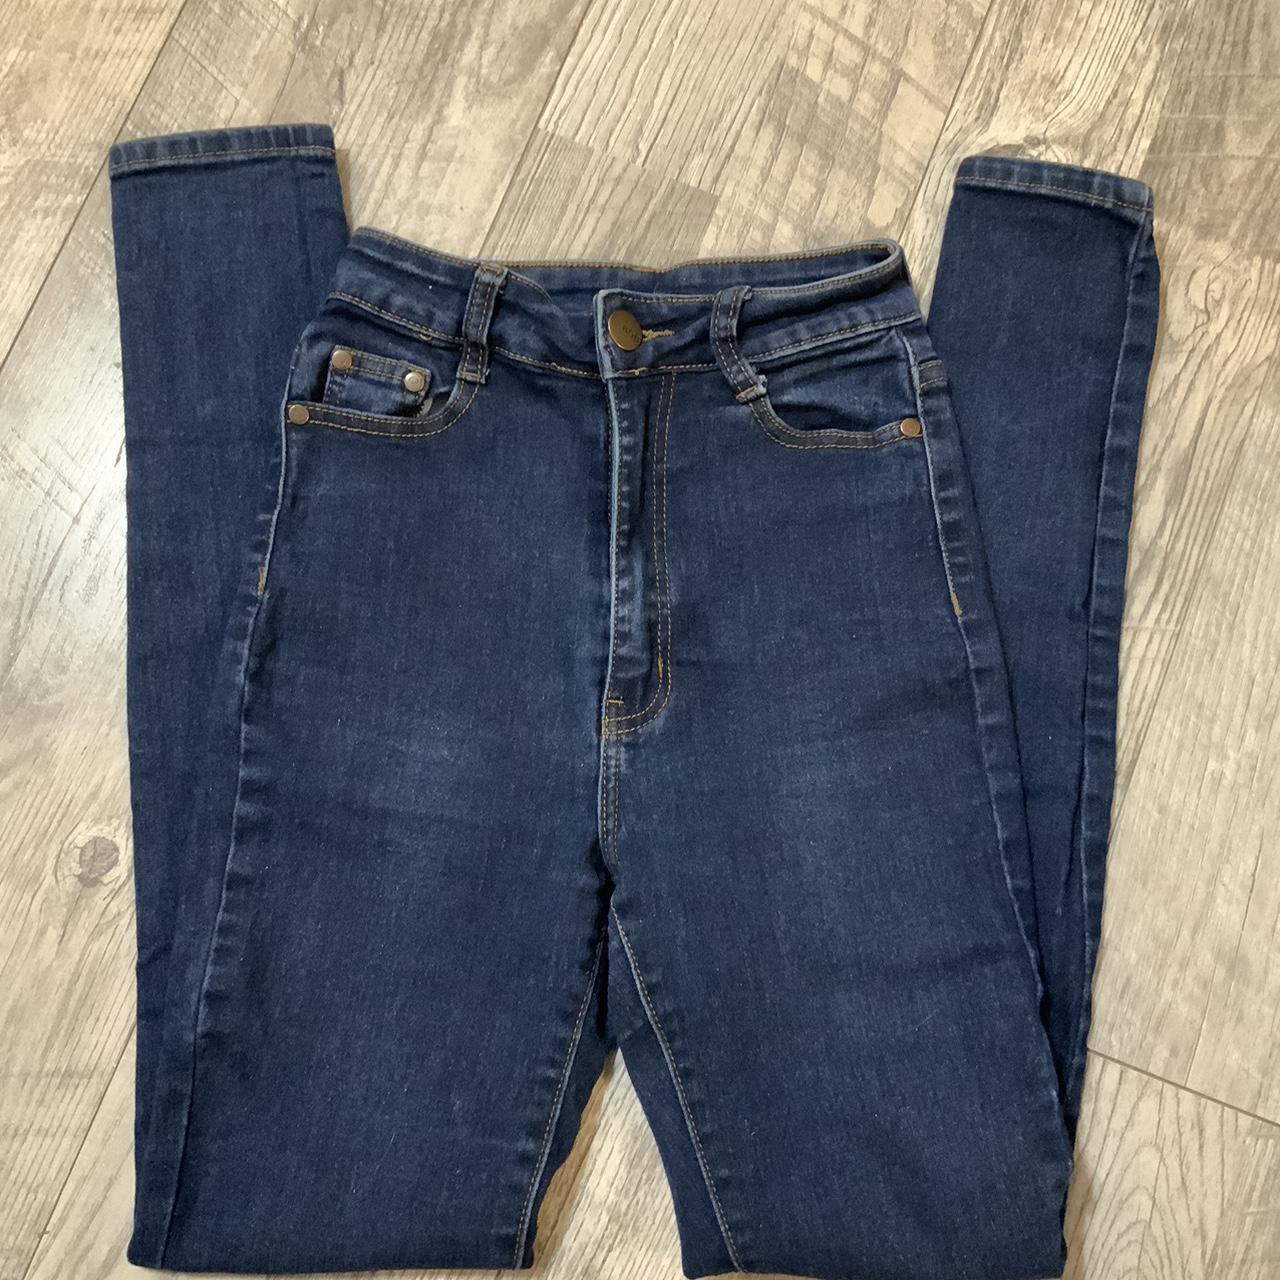 item listed by thriftmommanae